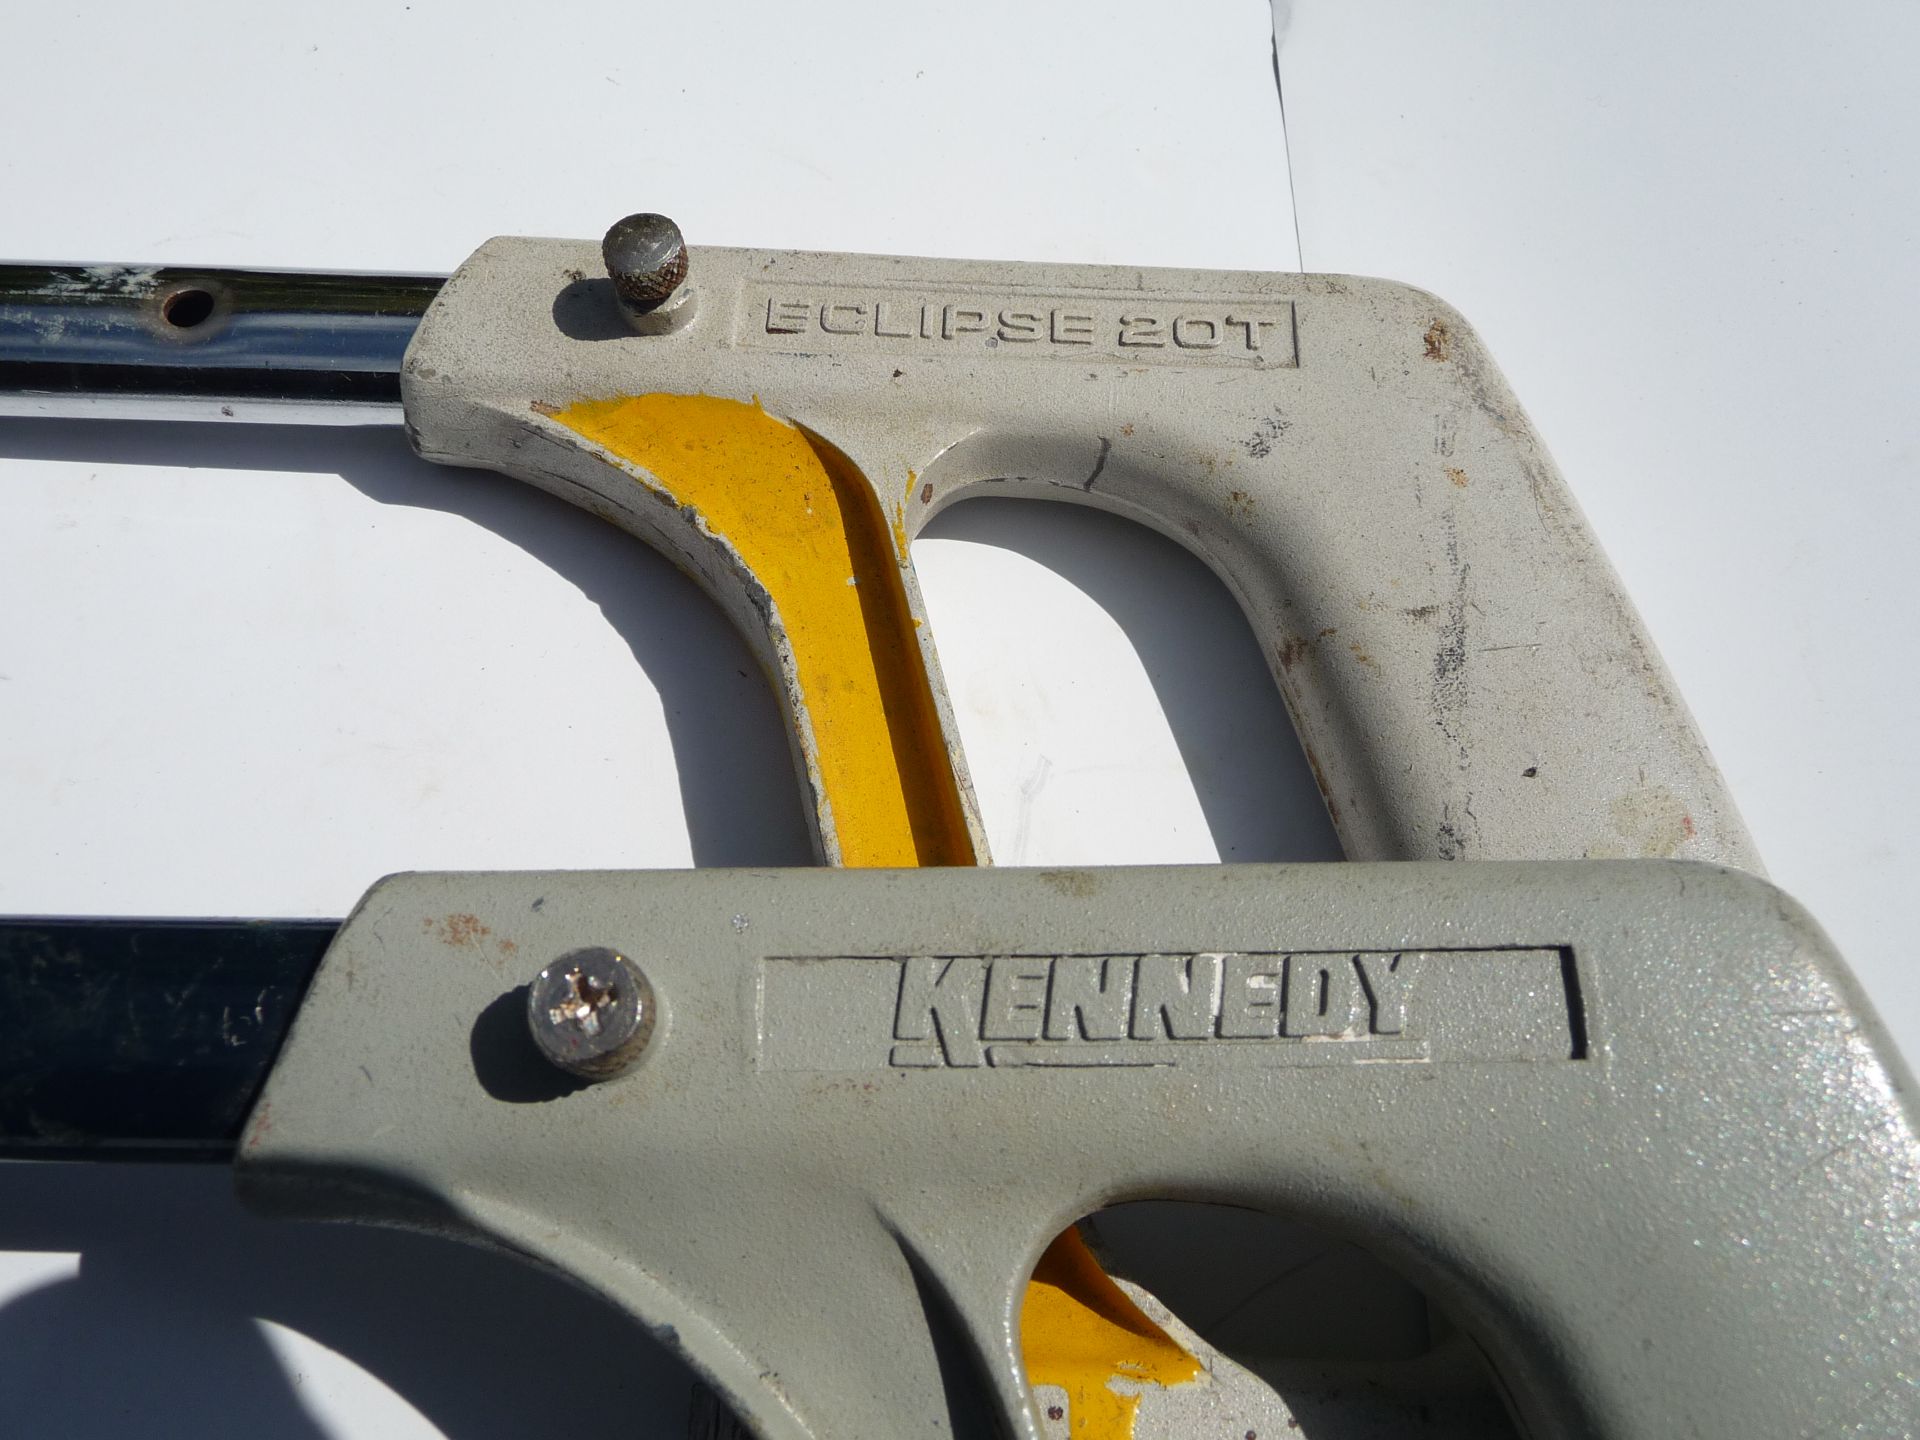 Hacksaw Frame (Kennedy and Eclipse Blue) Blade length: 300mm (12") x 2 - Image 2 of 3